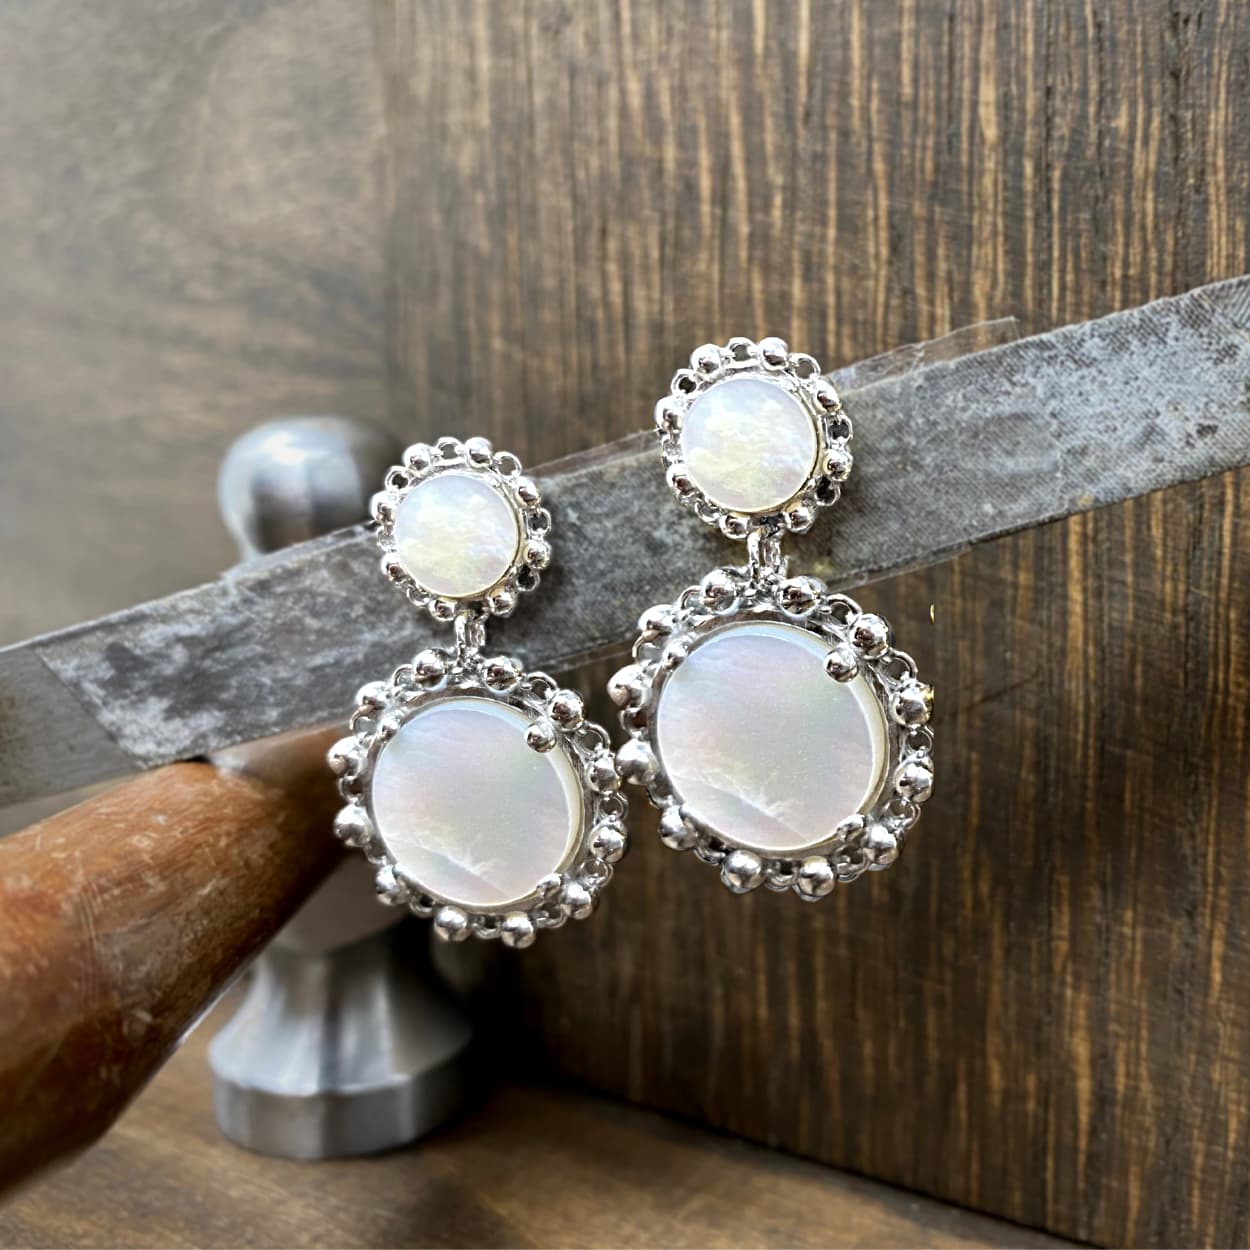 Statement Piazza Earrings in Silver with Mother of Pearl